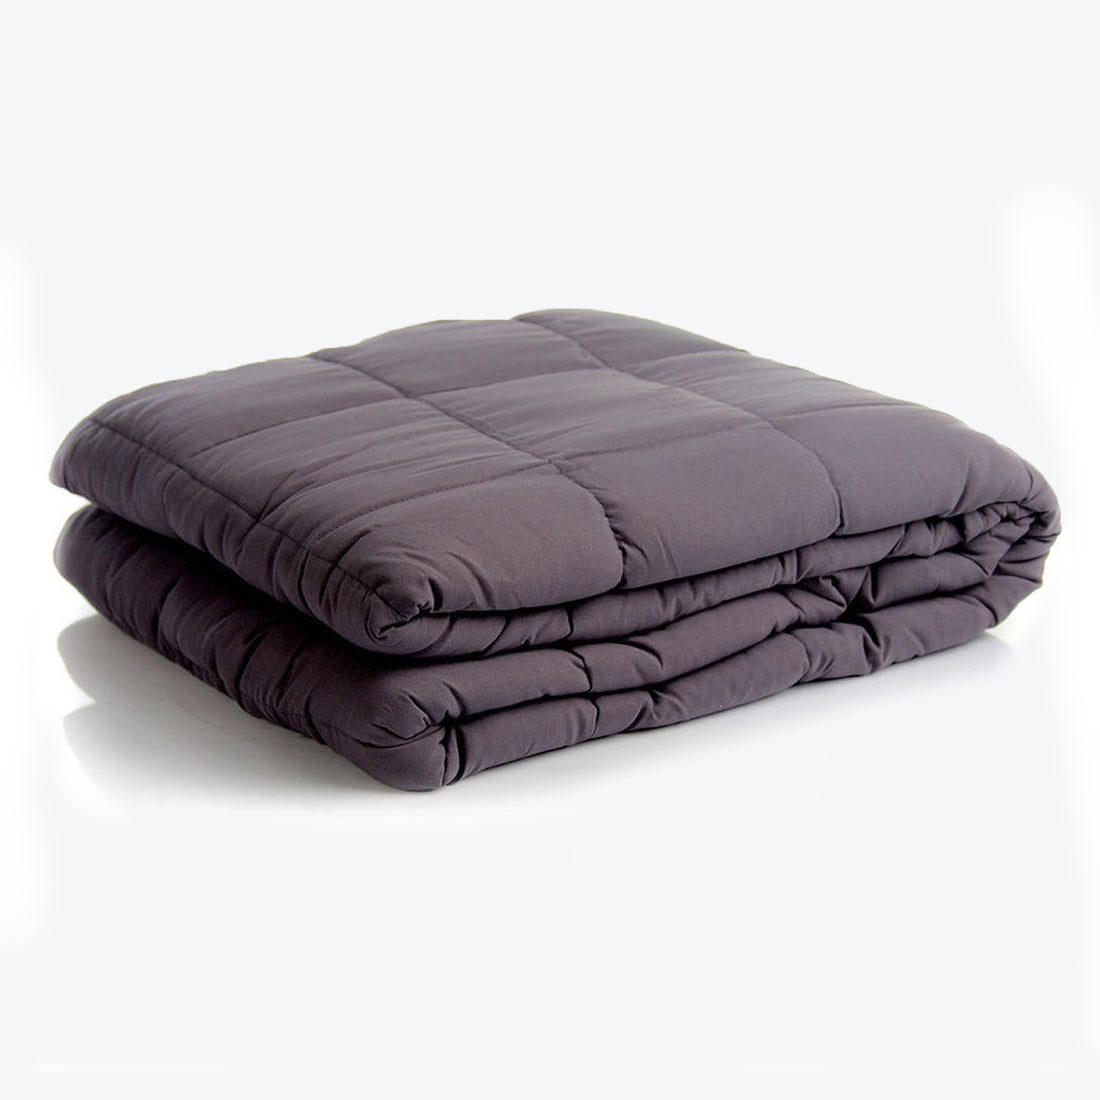 Weighted Blanket - Reduce anxiety and stress with better sleep